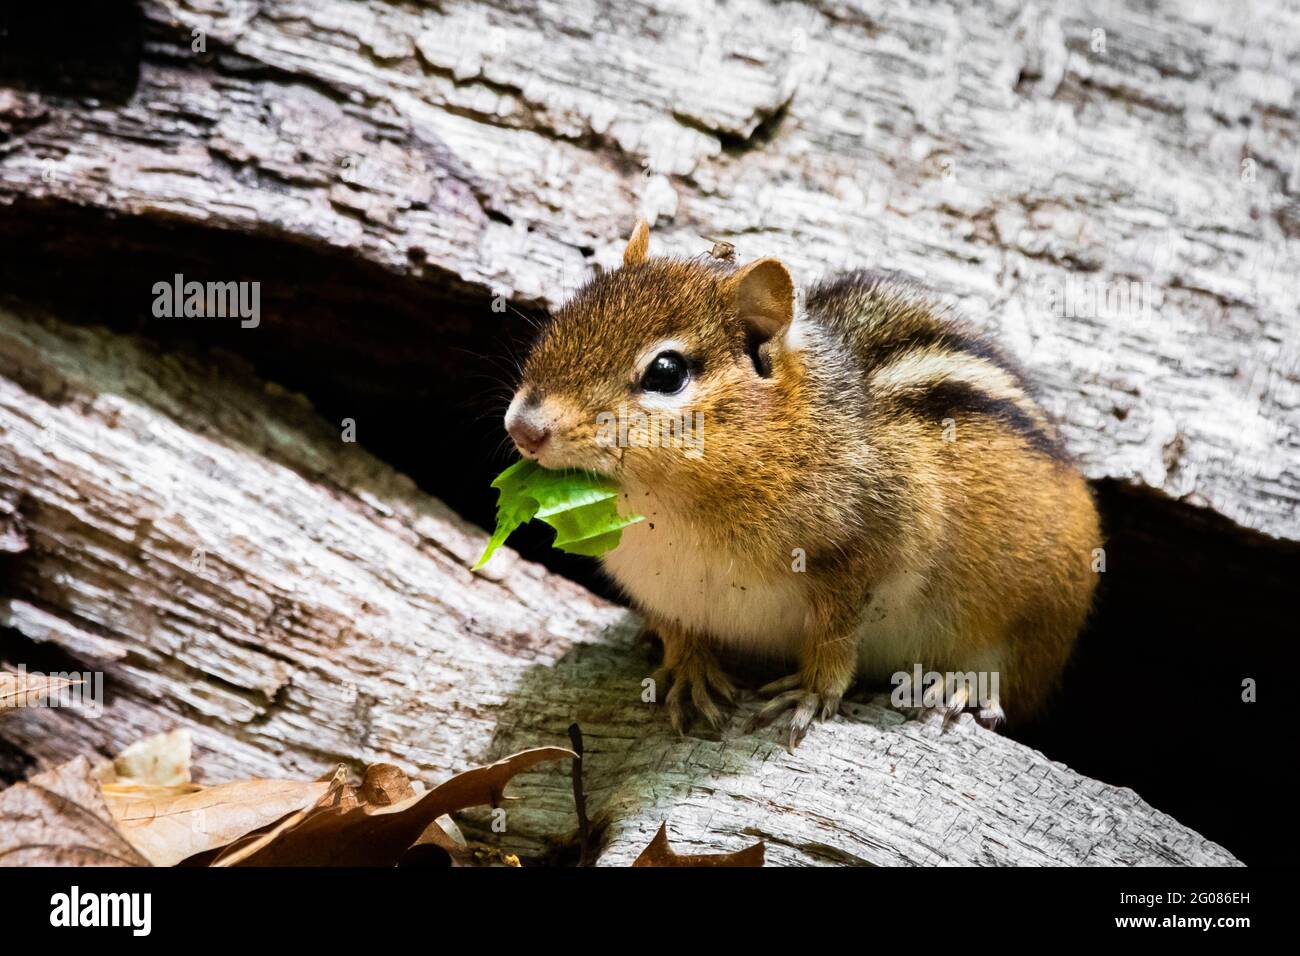 Cute and curious chipmunk eating leafs close up in the tree Stock Photo